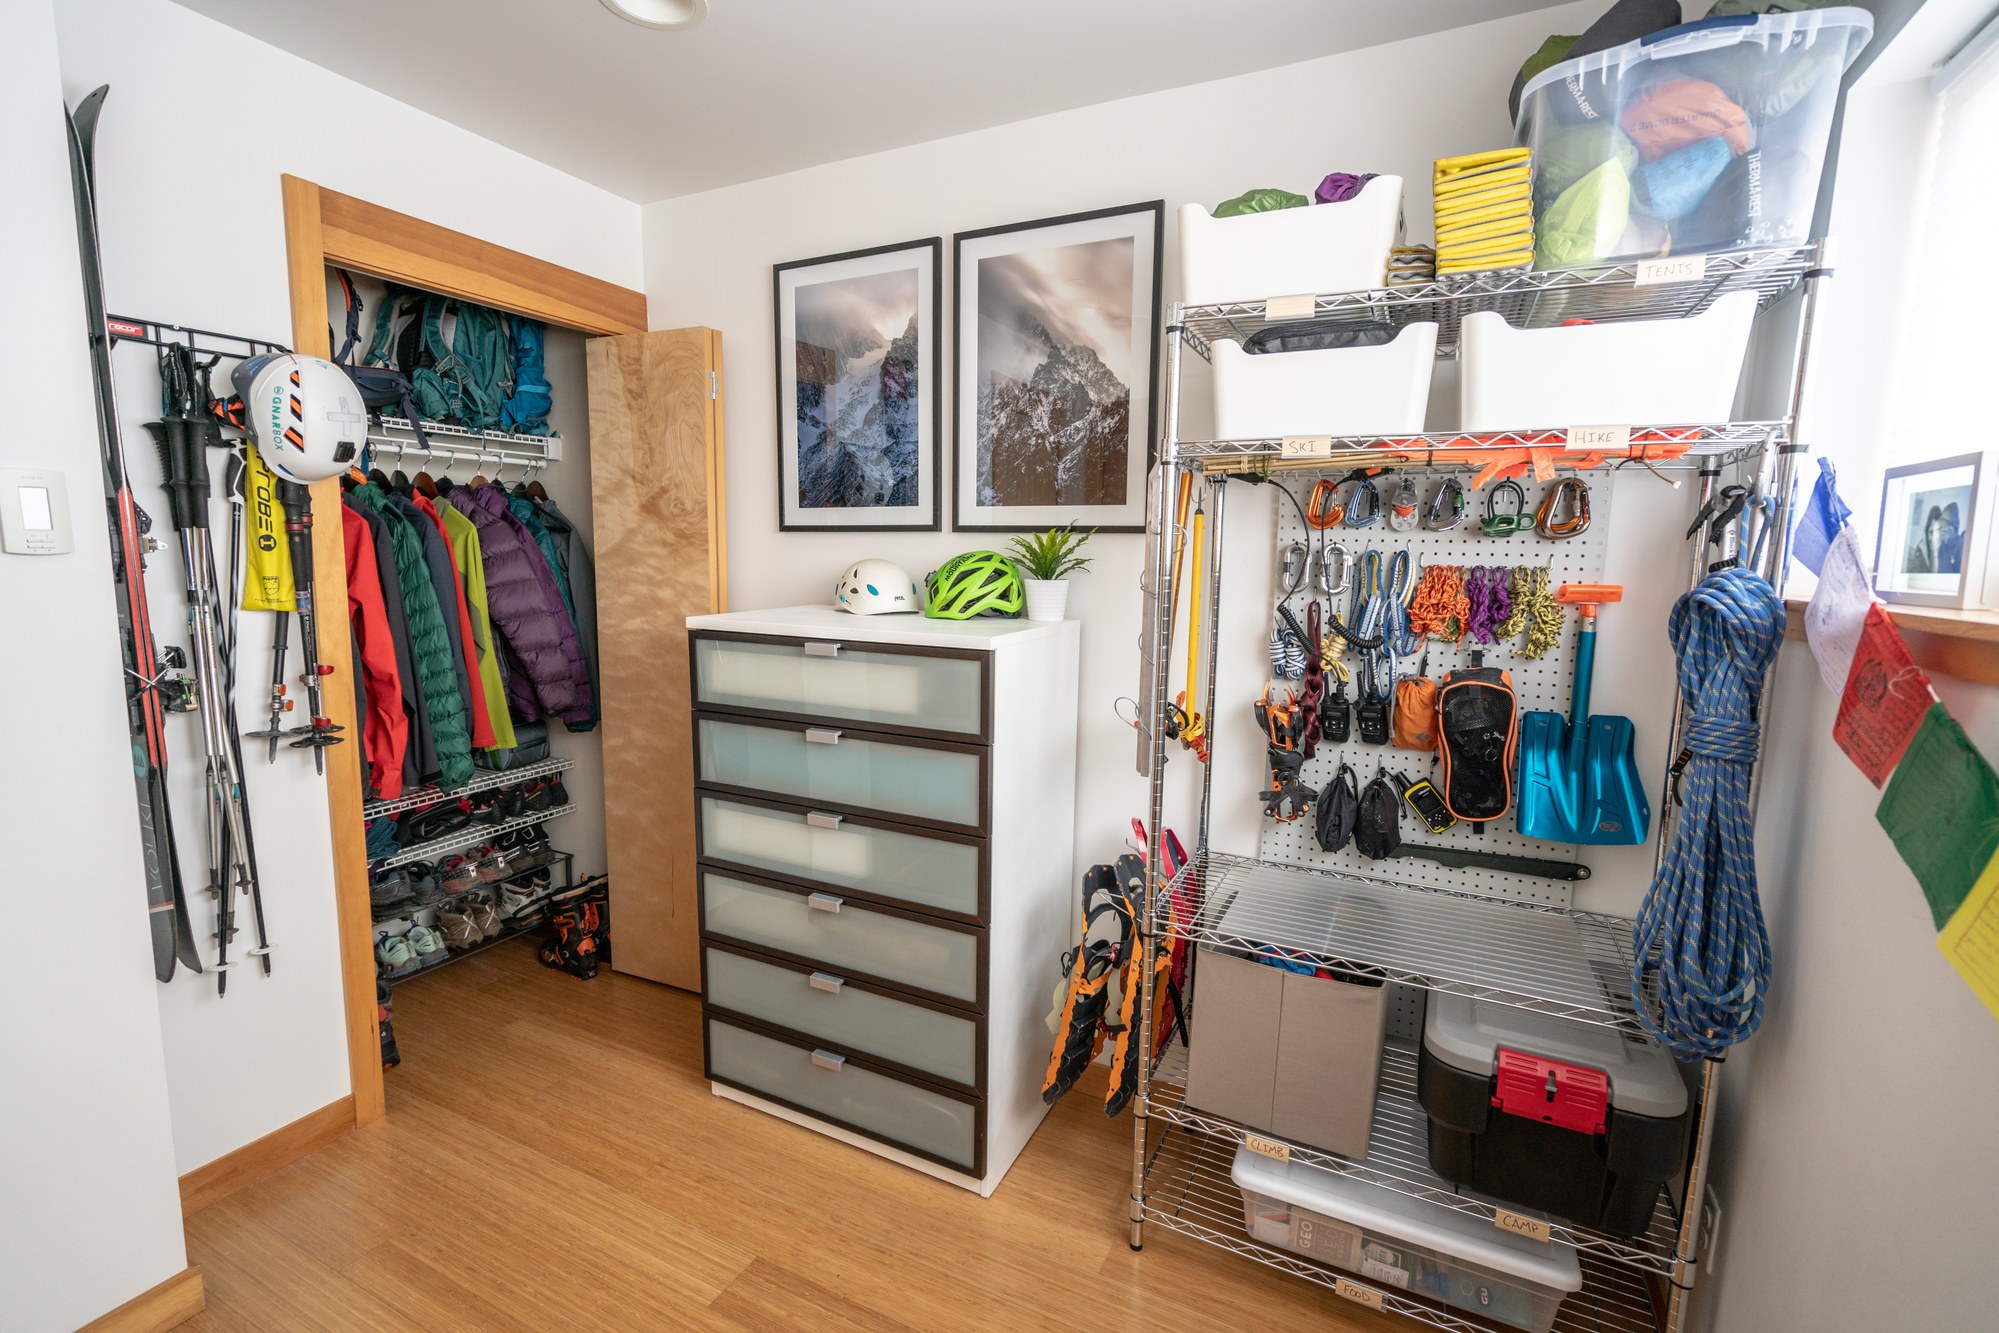 https://www.mountaineers.org/blog/diy-gear-room-from-garage-to-city-apartment/@@images/image